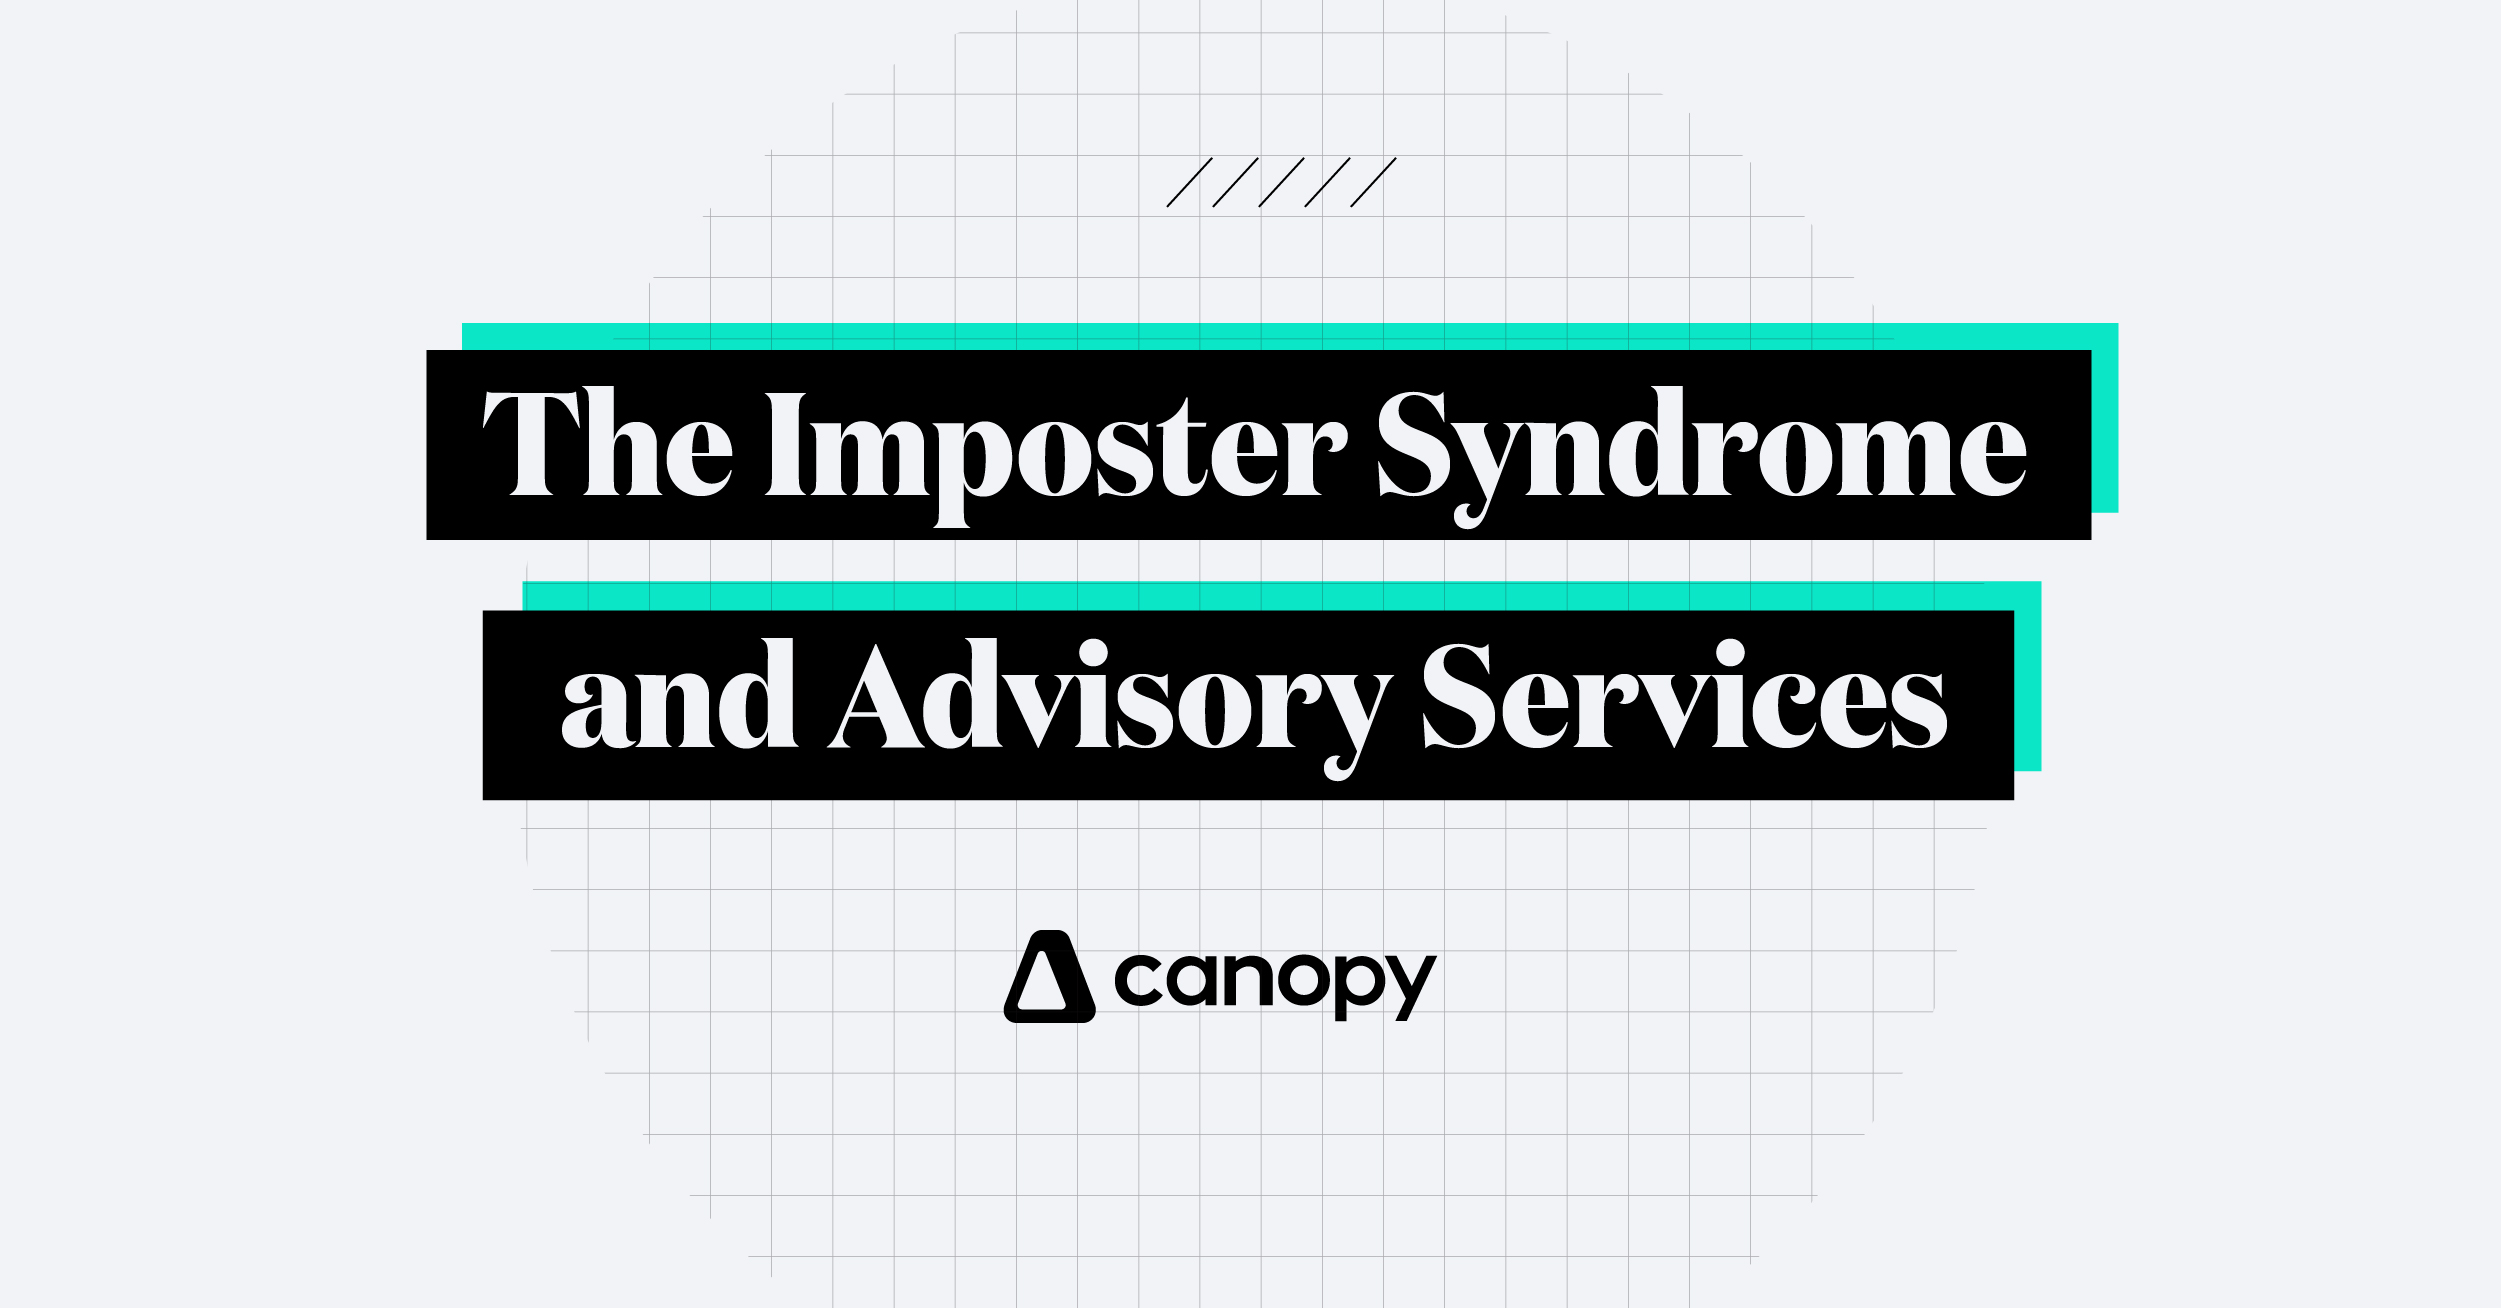 The Imposter Syndrome and Advisory Services